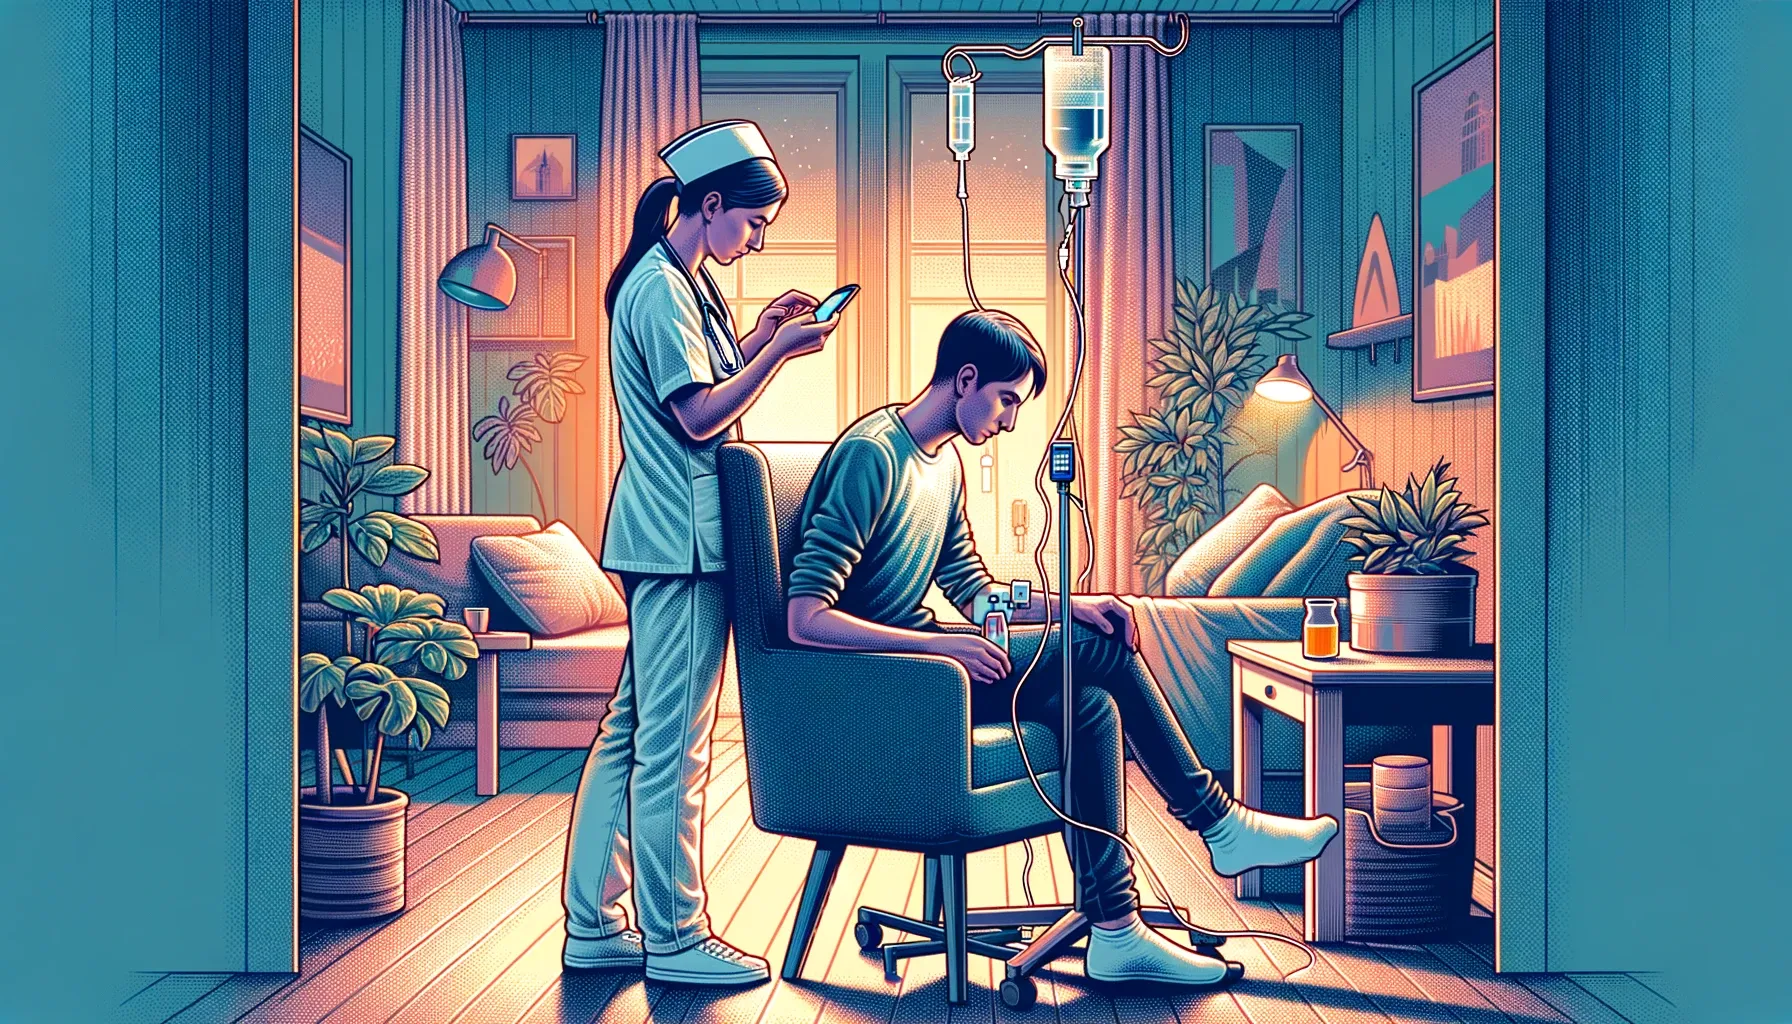 Illustration of a patient receiving IV medication at home